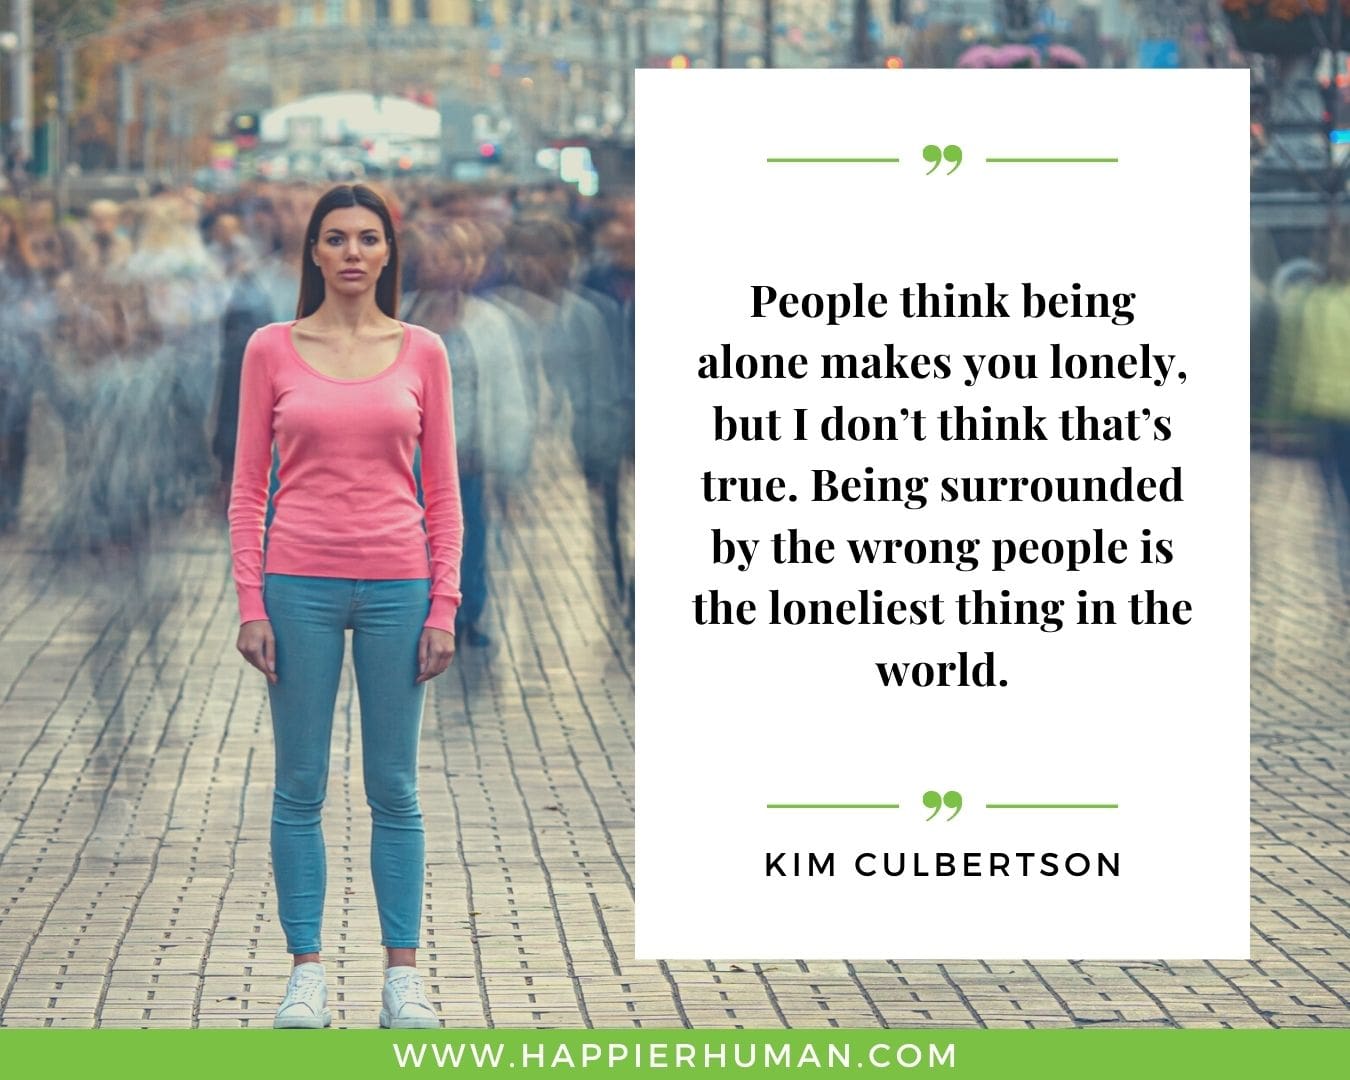 Loneliness Quotes - “People think being alone makes you lonely, but I don’t think that’s true. Being surrounded by the wrong people is the loneliest thing in the world.”– Kim Culbertson